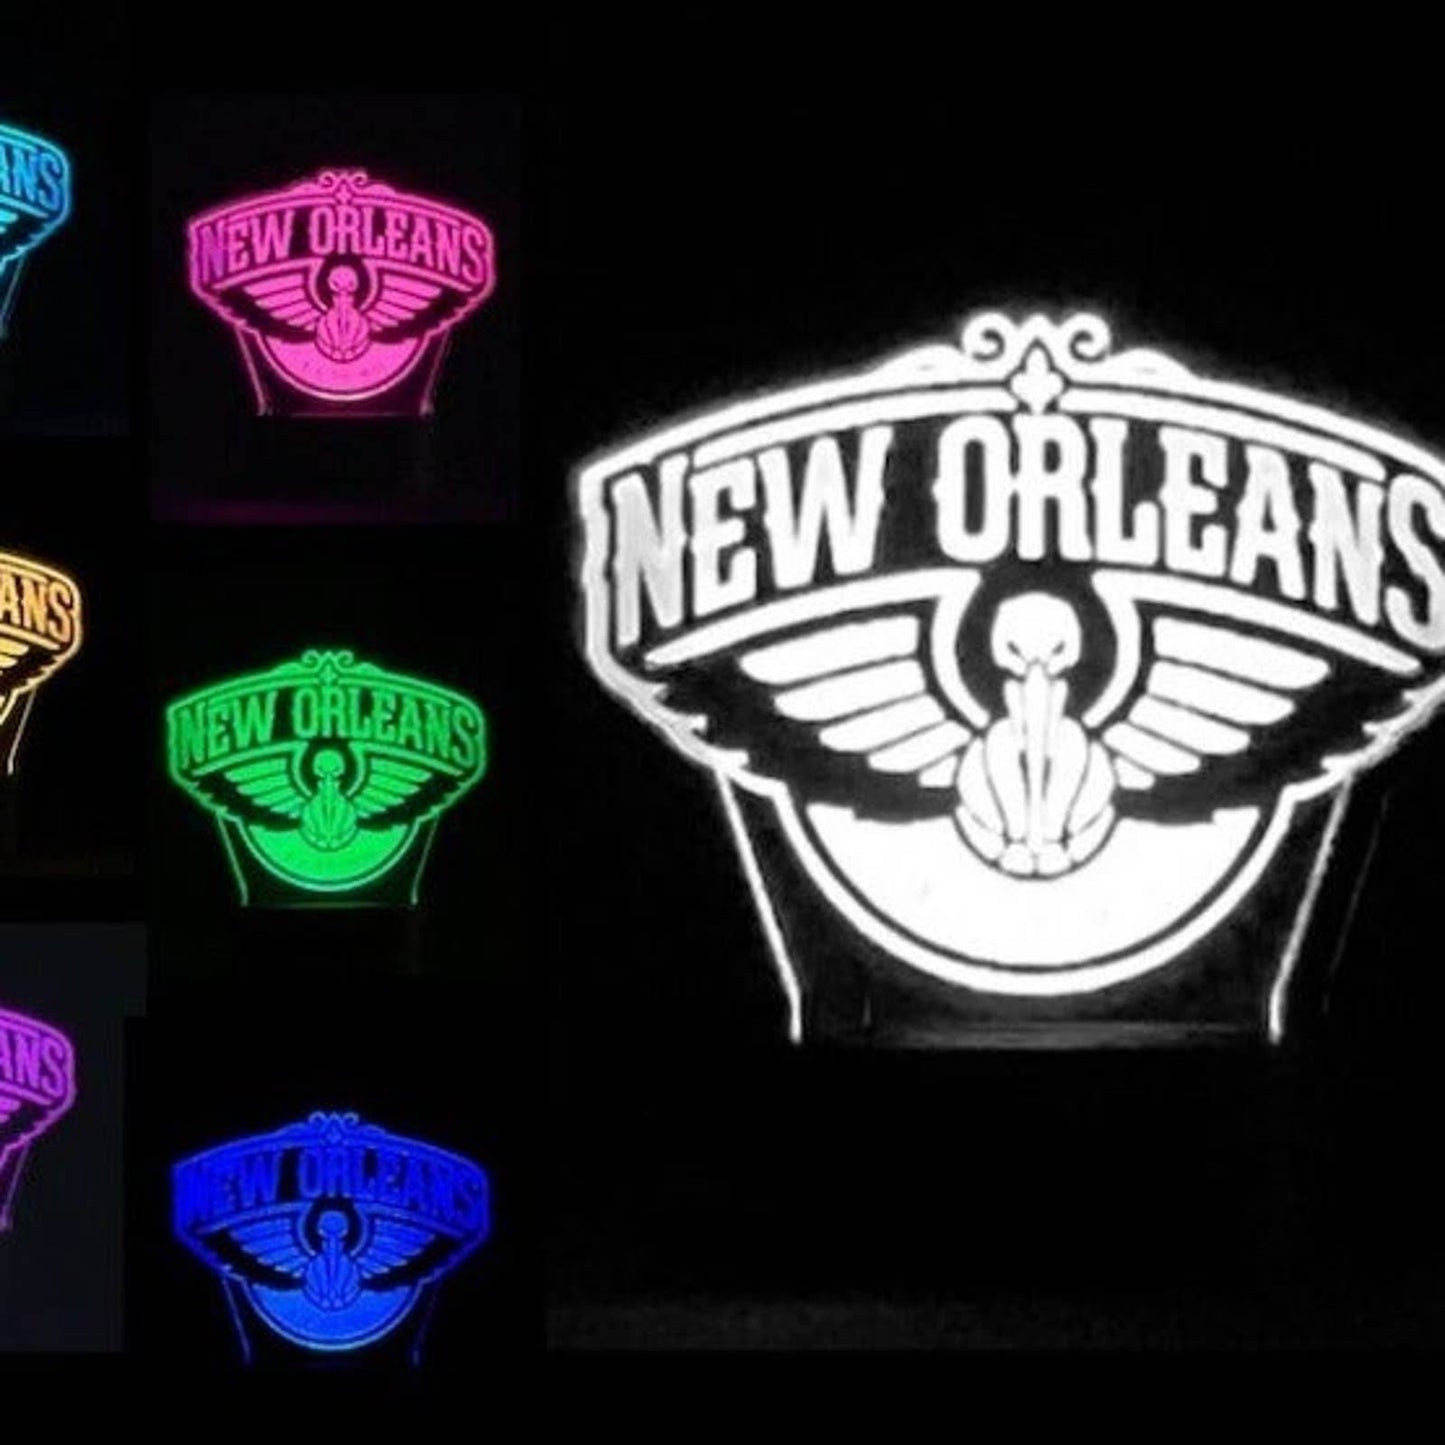 New Orleans Pelicans 3D LED Night-Light 7 Color Changing Lamp w/ Touch Switch